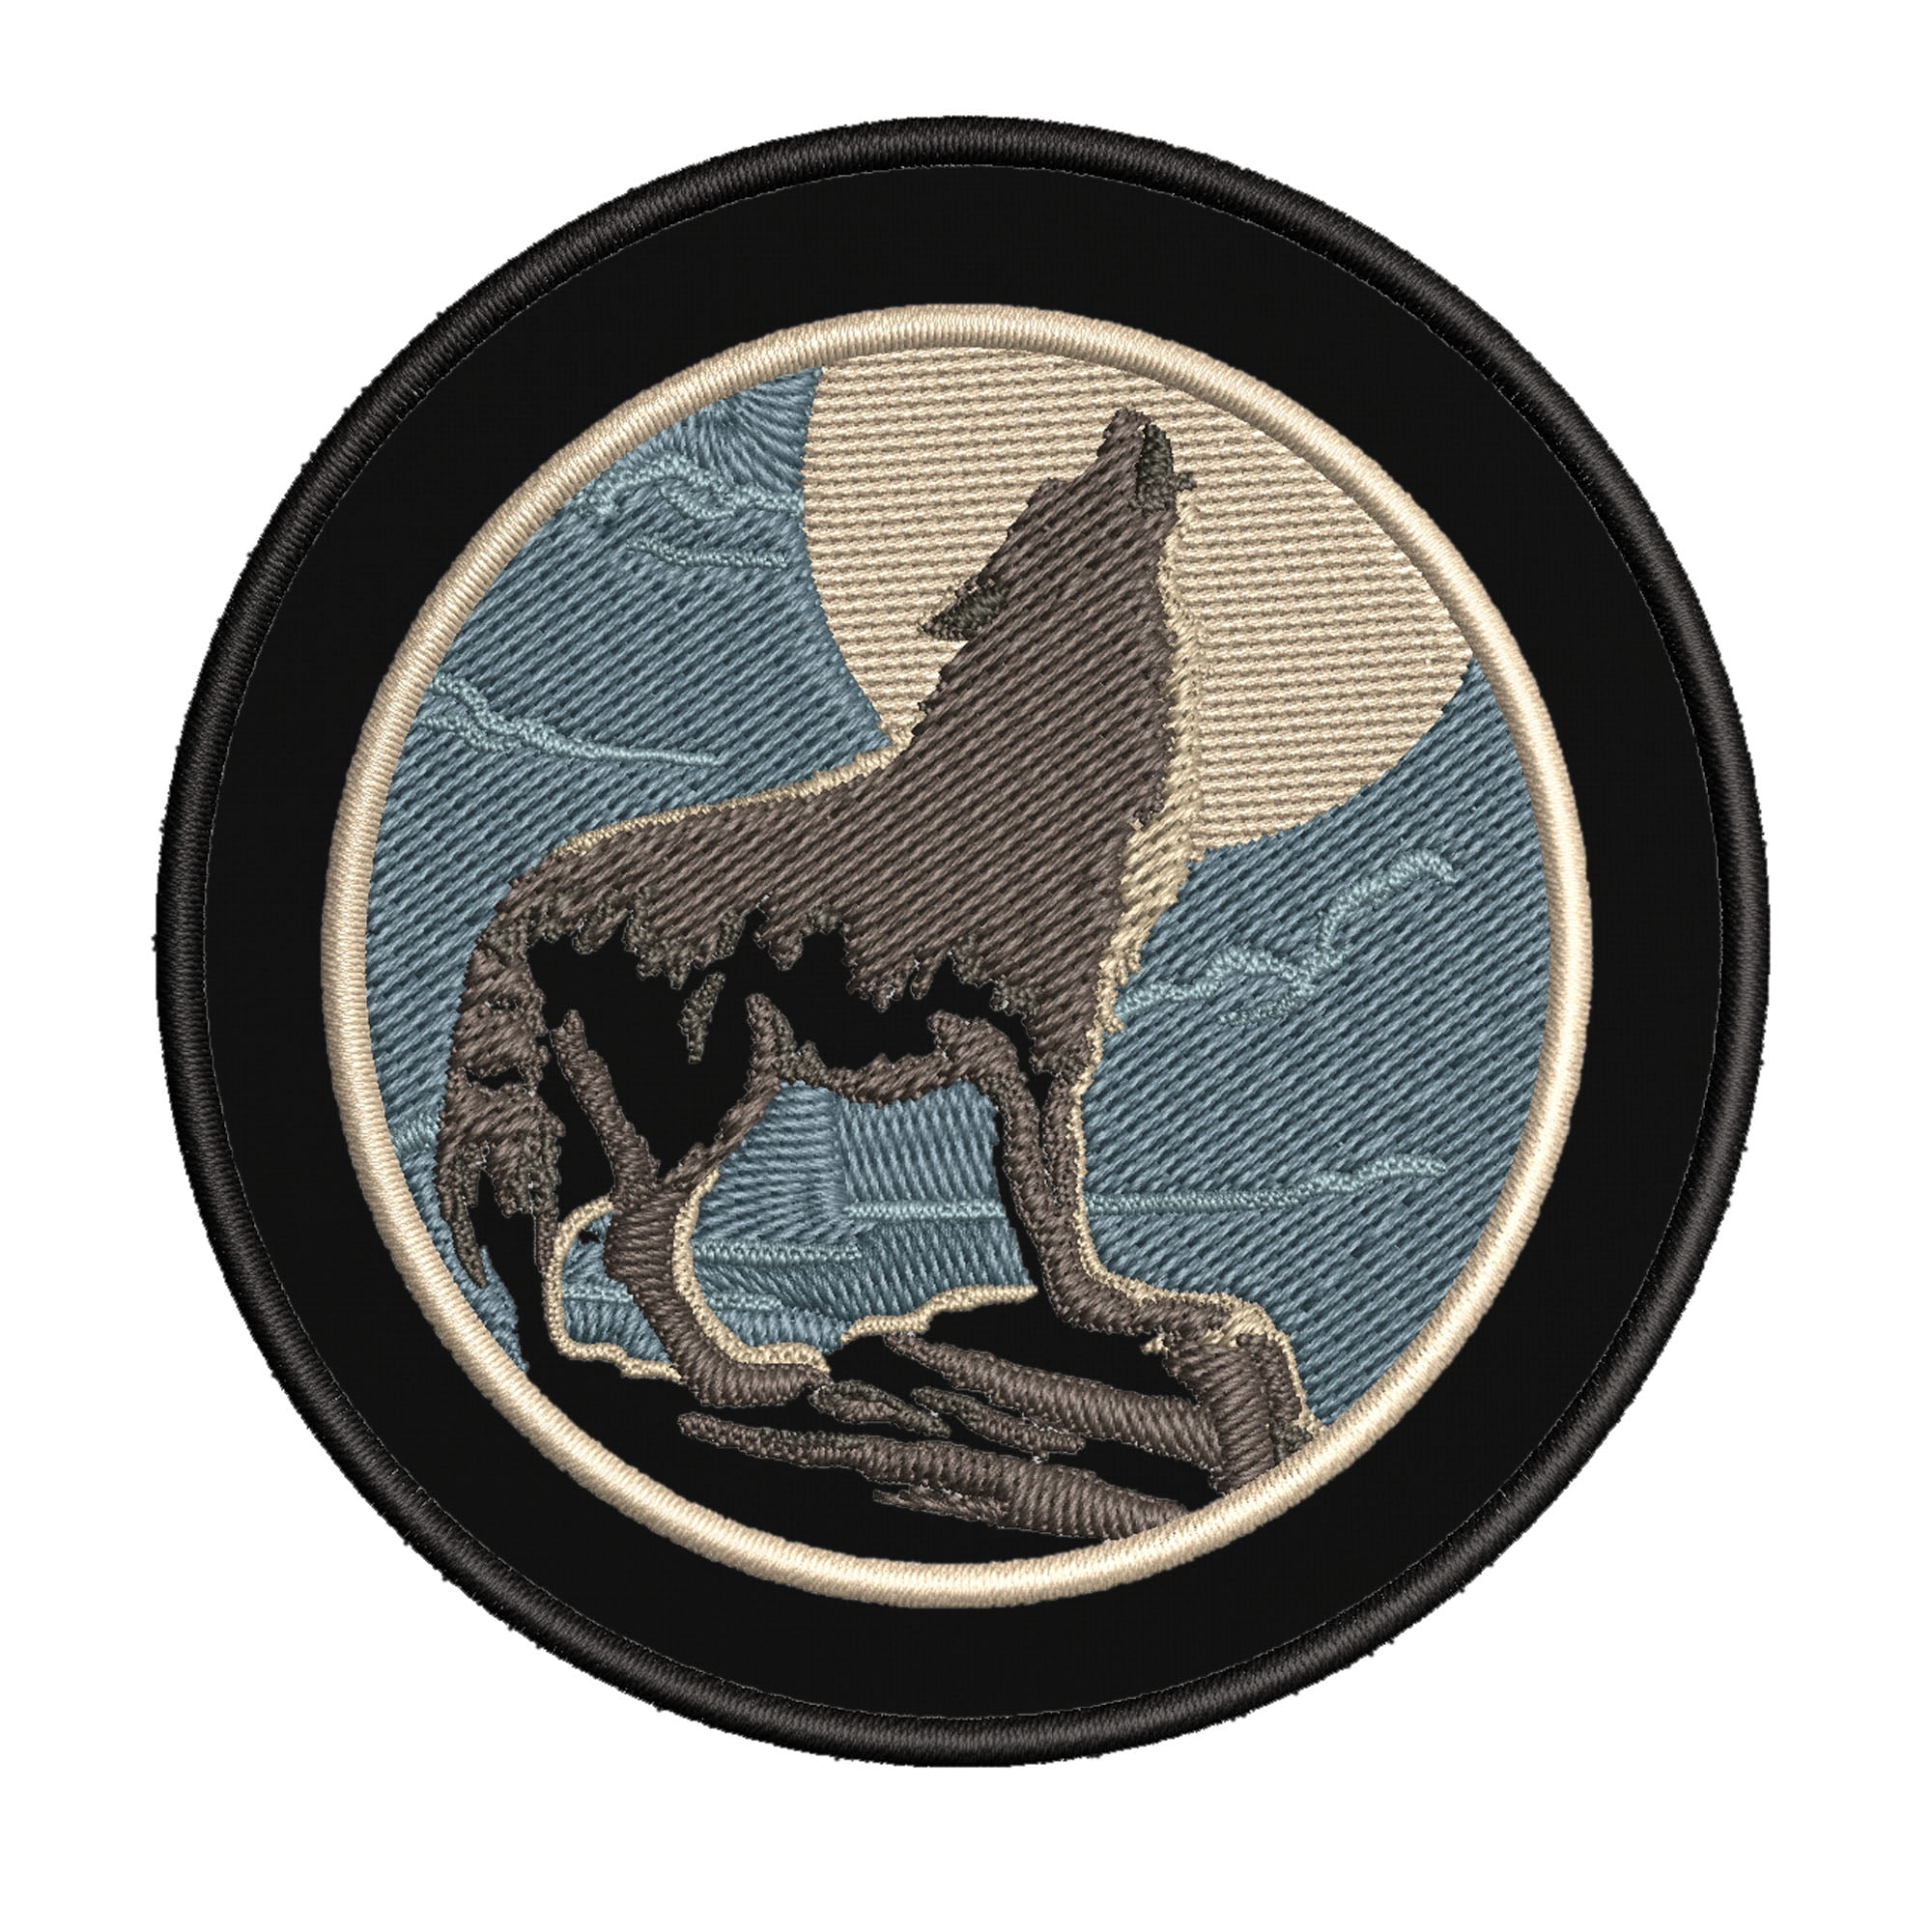 Wolf Howling at the Full Moon Embroidered Iron on Patches for